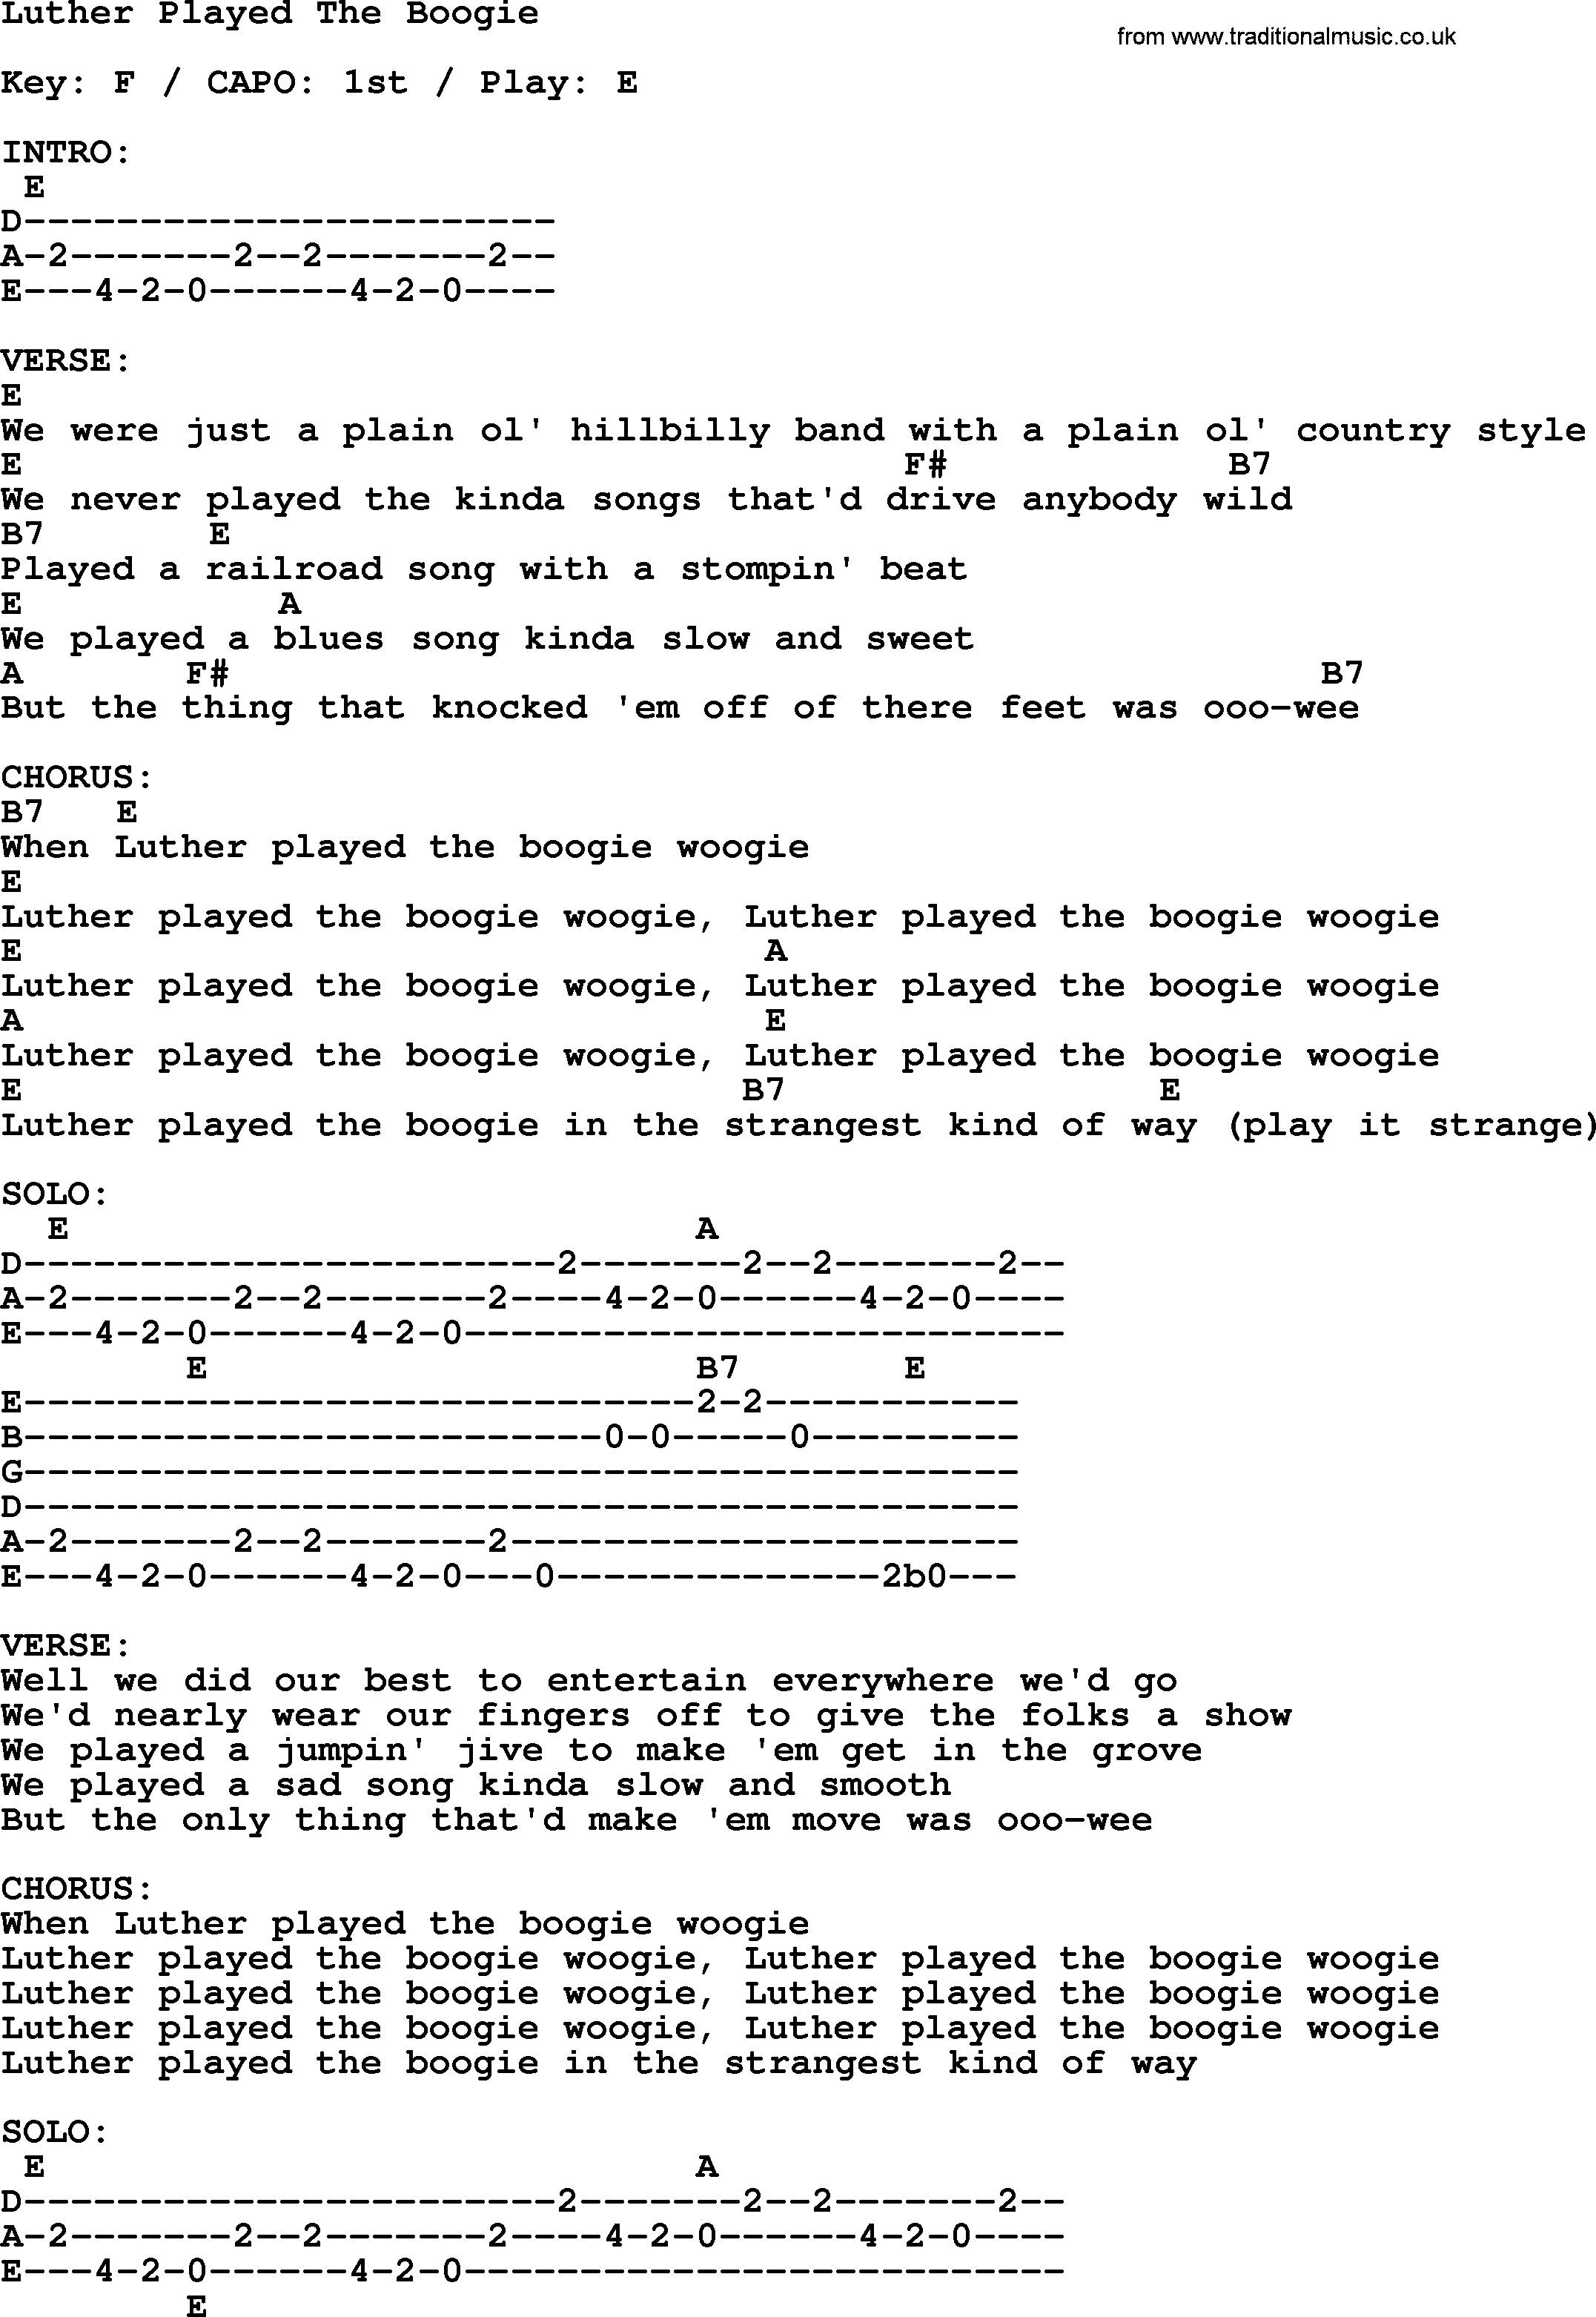 Johnny Cash song Luther Played The Boogie, lyrics and chords